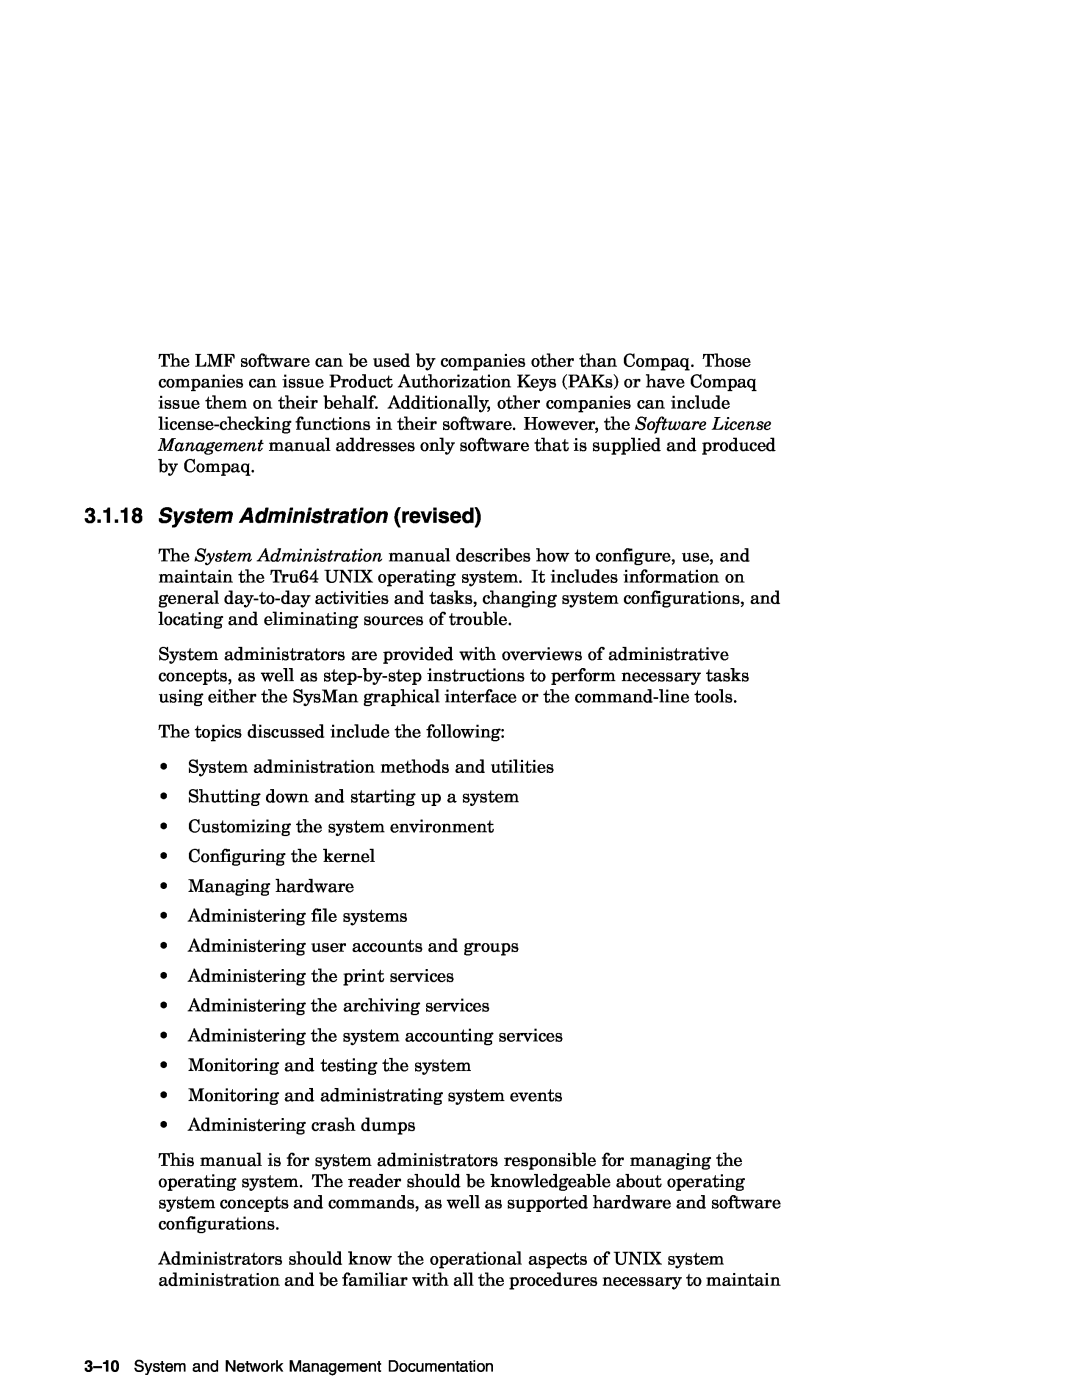 Compaq AA-RH8RD-TE manual System Administration revised, System and Network Management Documentation 